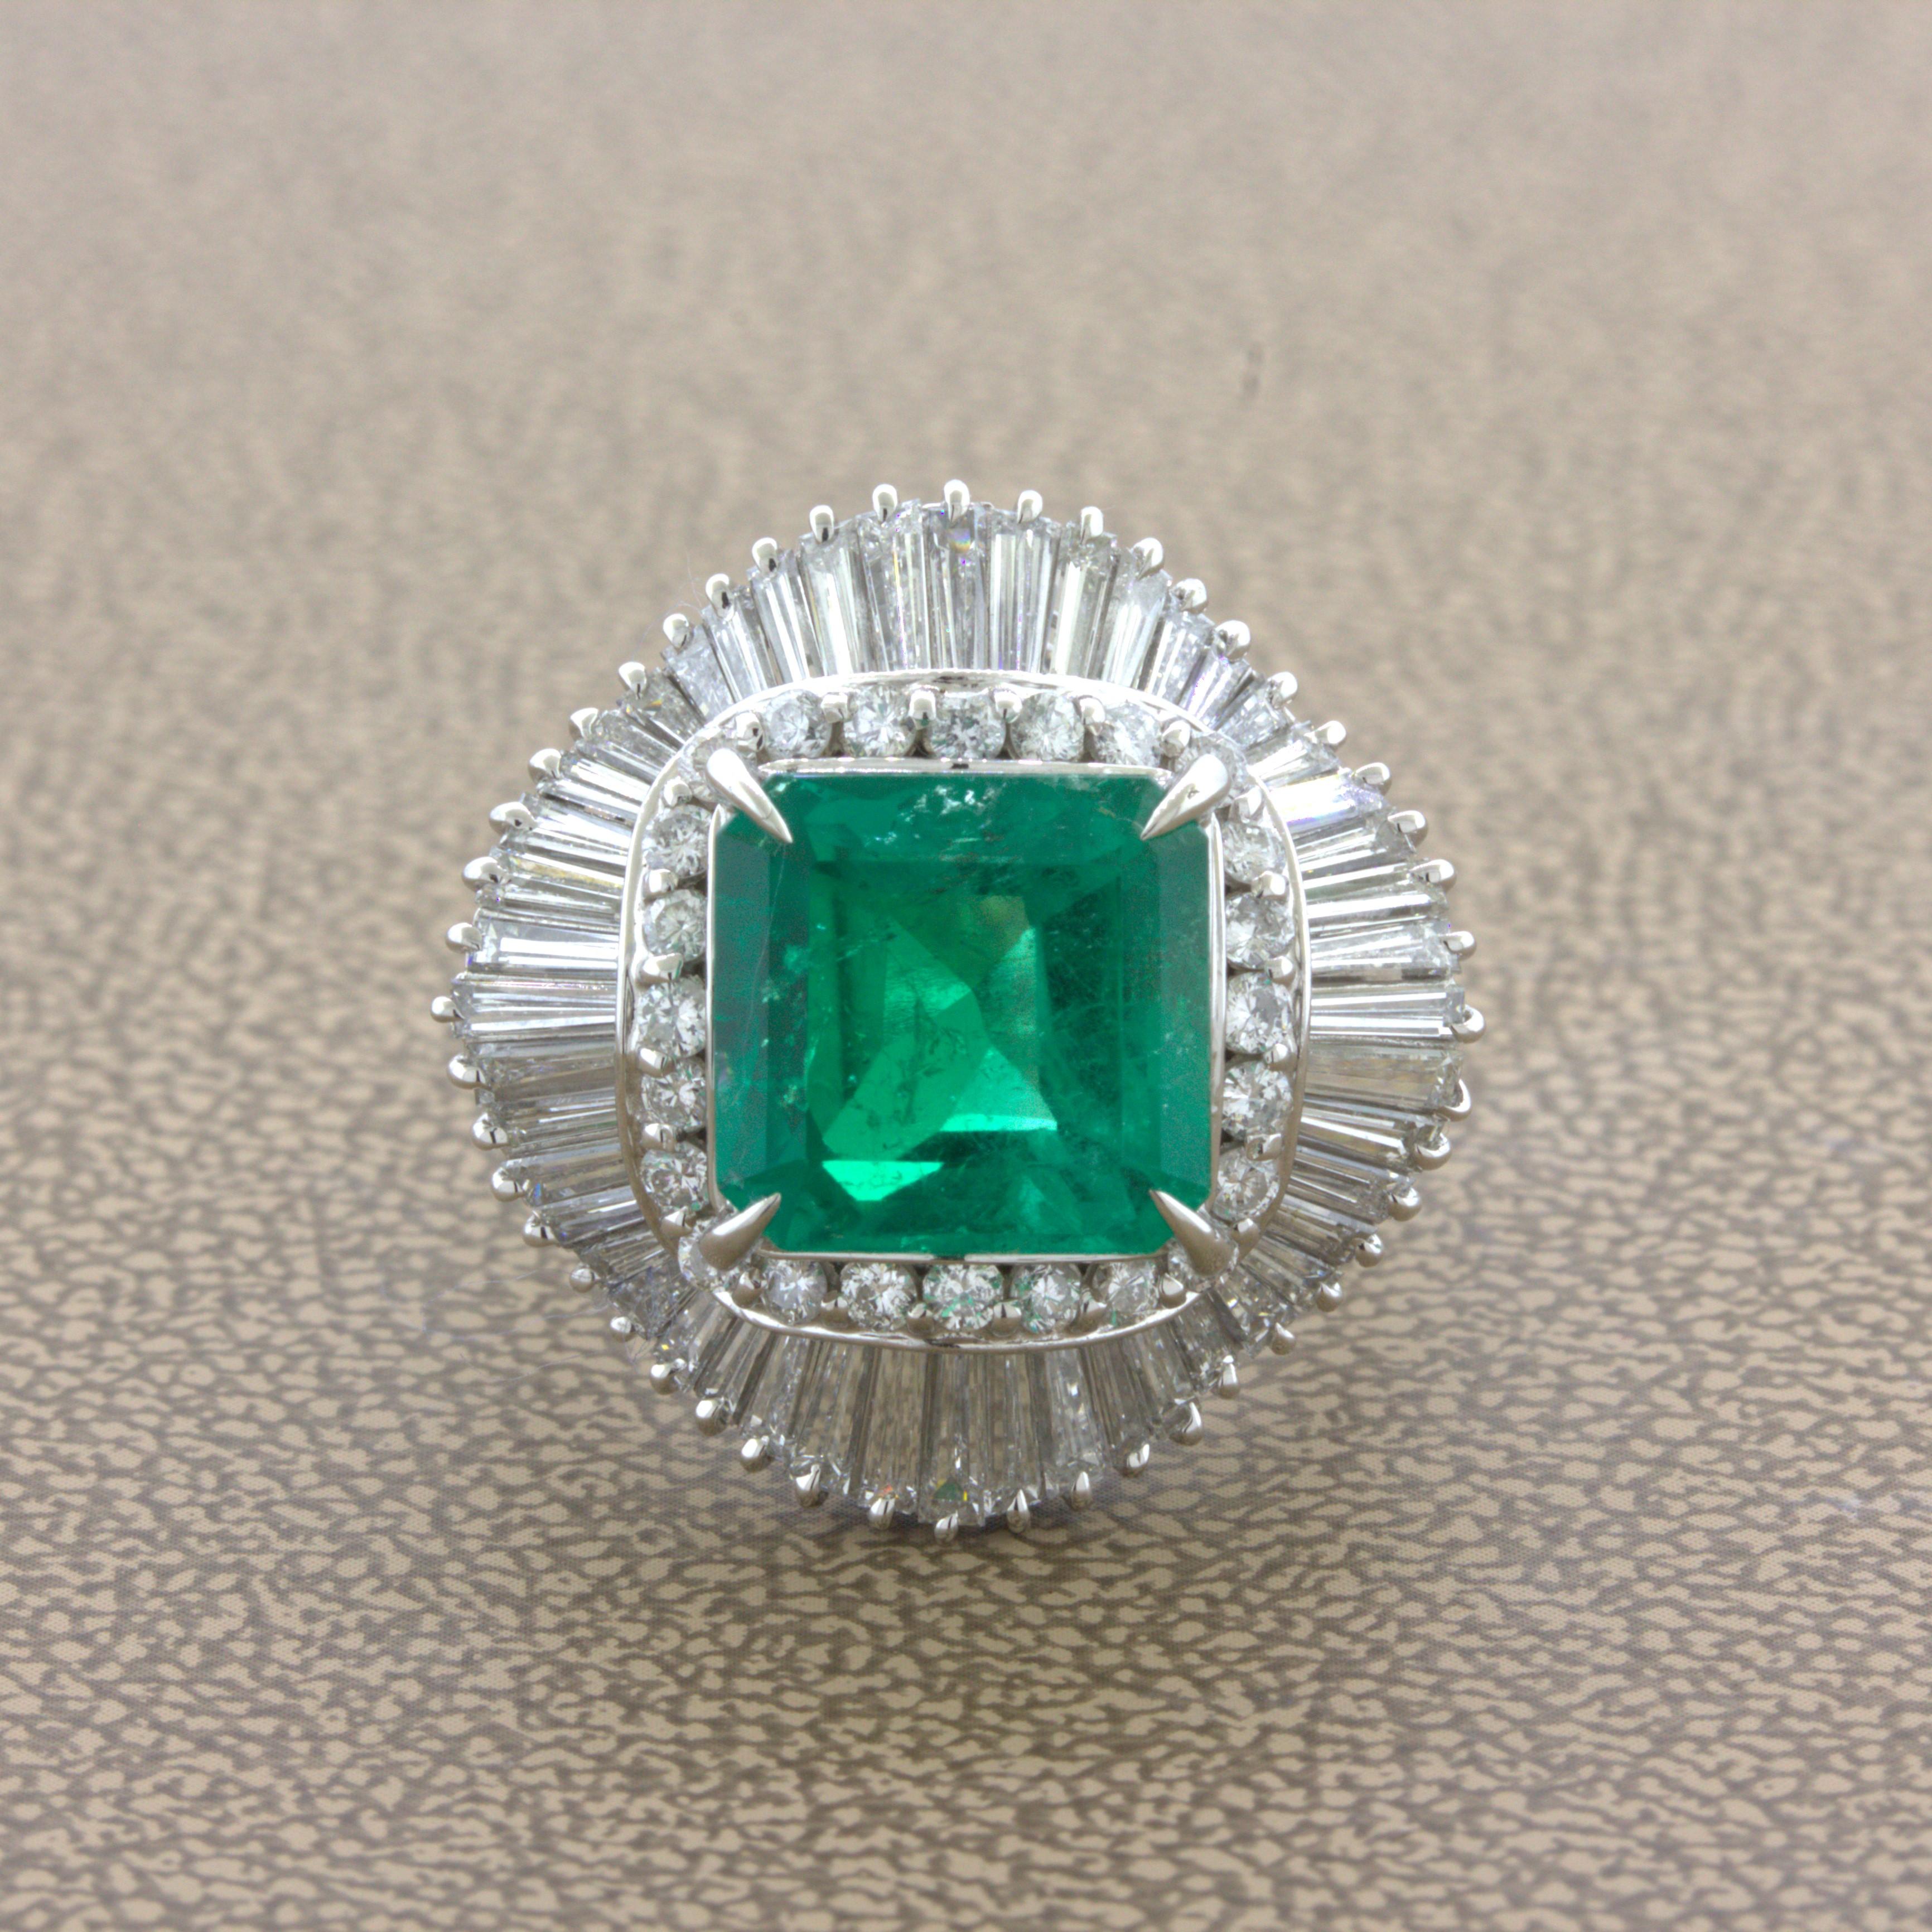 A fine Colombian emerald weighing 4.42 carats takes center stage of this platinum ballerina ring. The emerald has the classic emerald-cut as well as an intense vivid green color only seen in top-quality stones. Adding to that, the emerald is